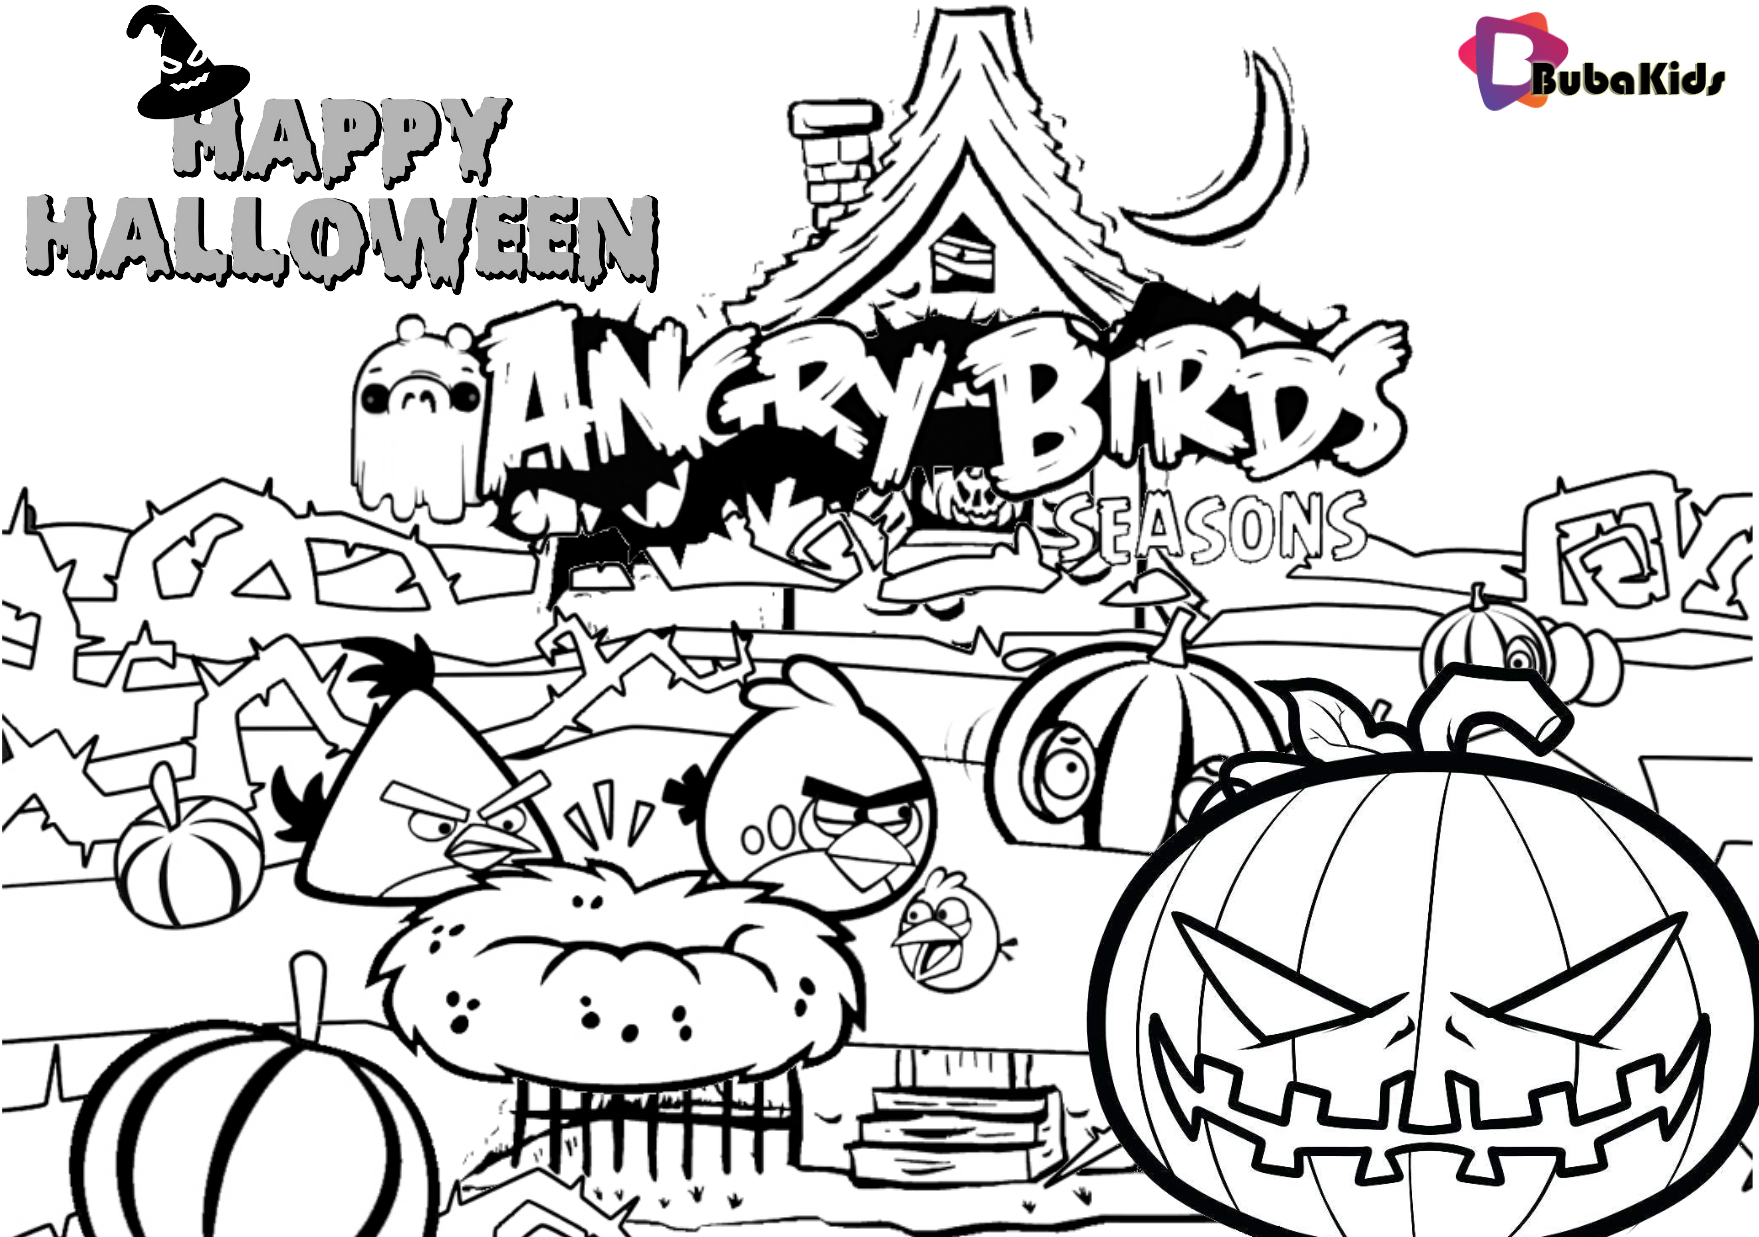 Angry Bird halloween party printable coloring page. Wallpaper